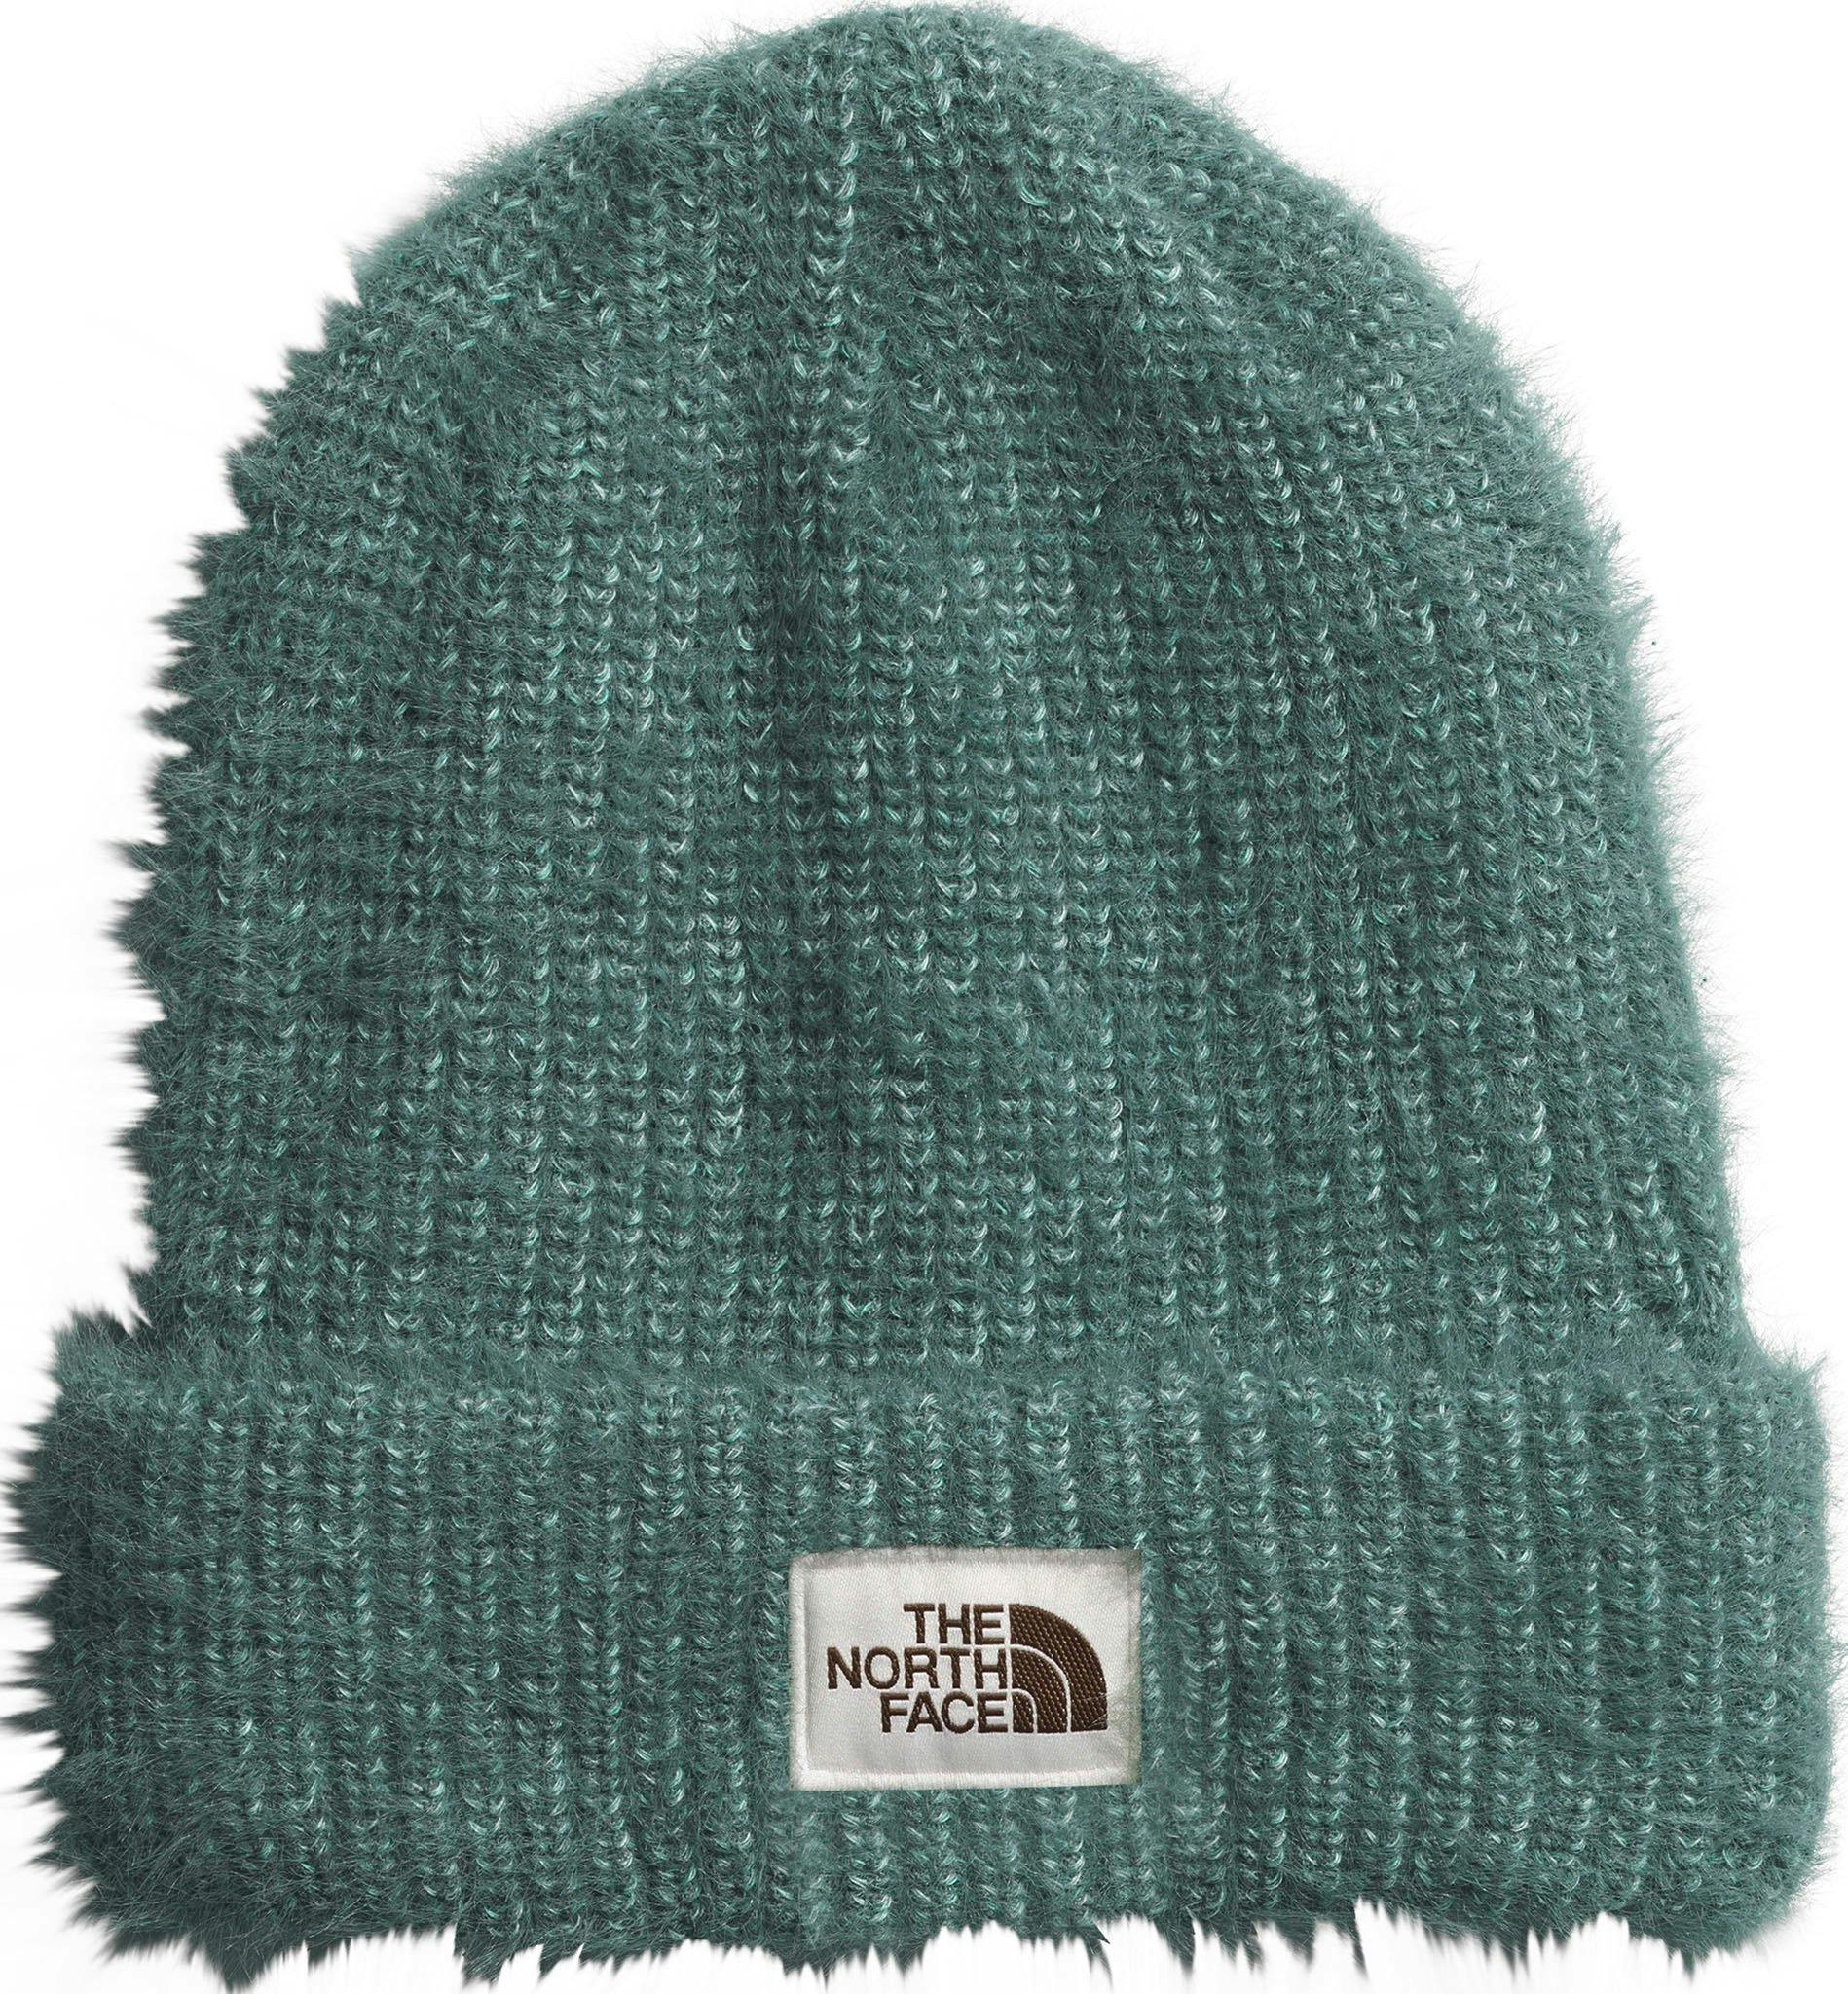 Product image for Salty Bae Lined Beanie - Women's